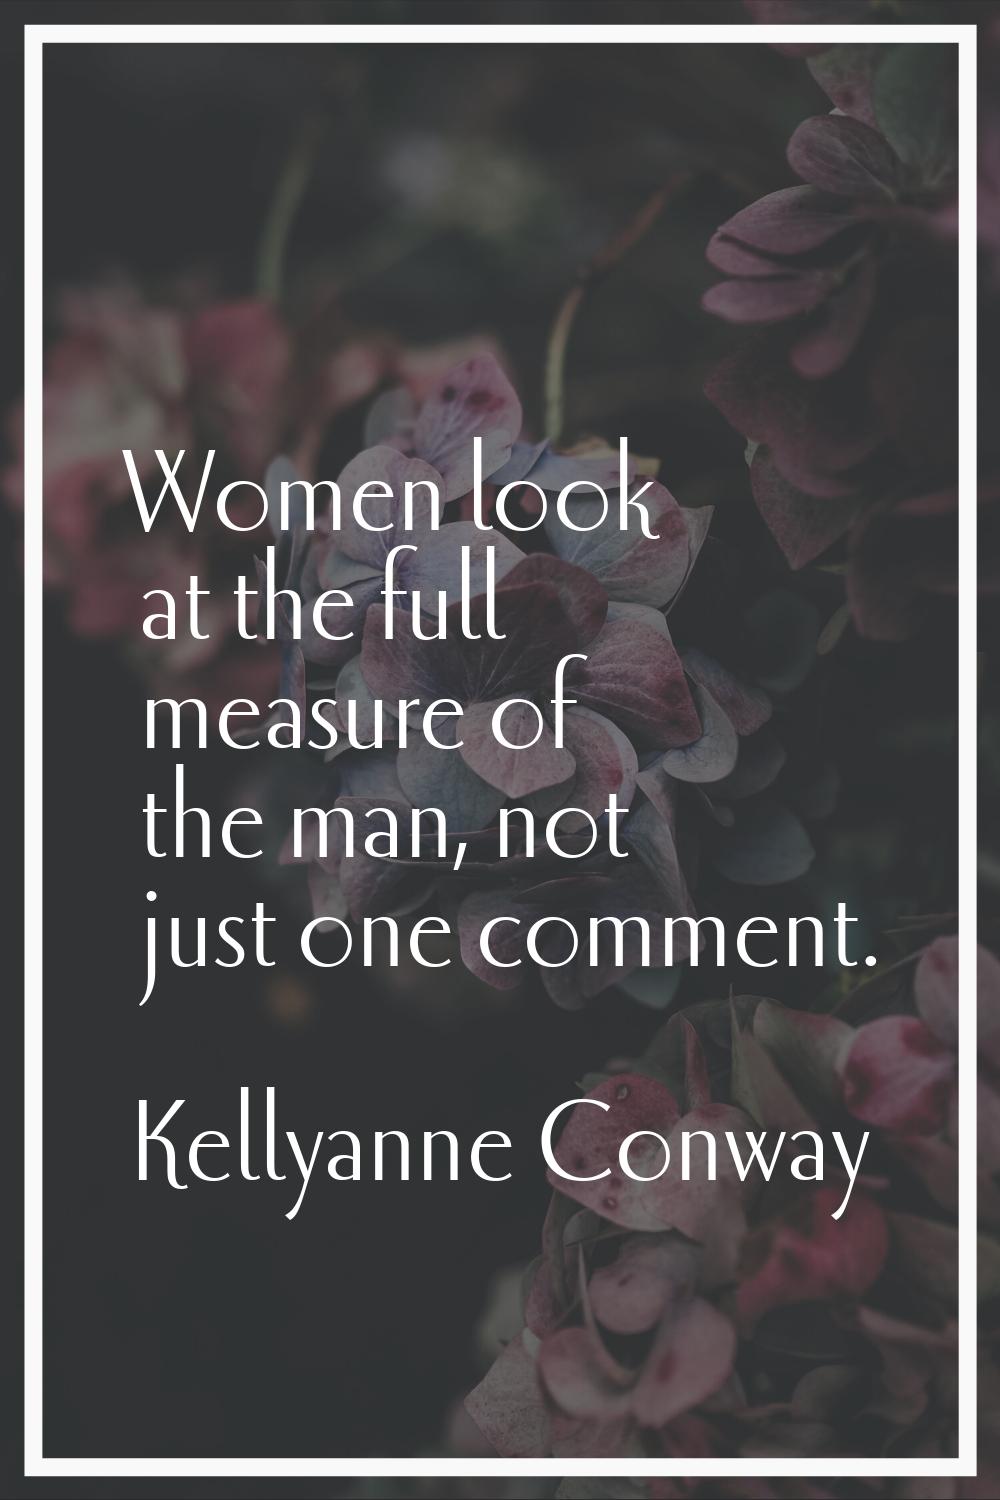 Women look at the full measure of the man, not just one comment.